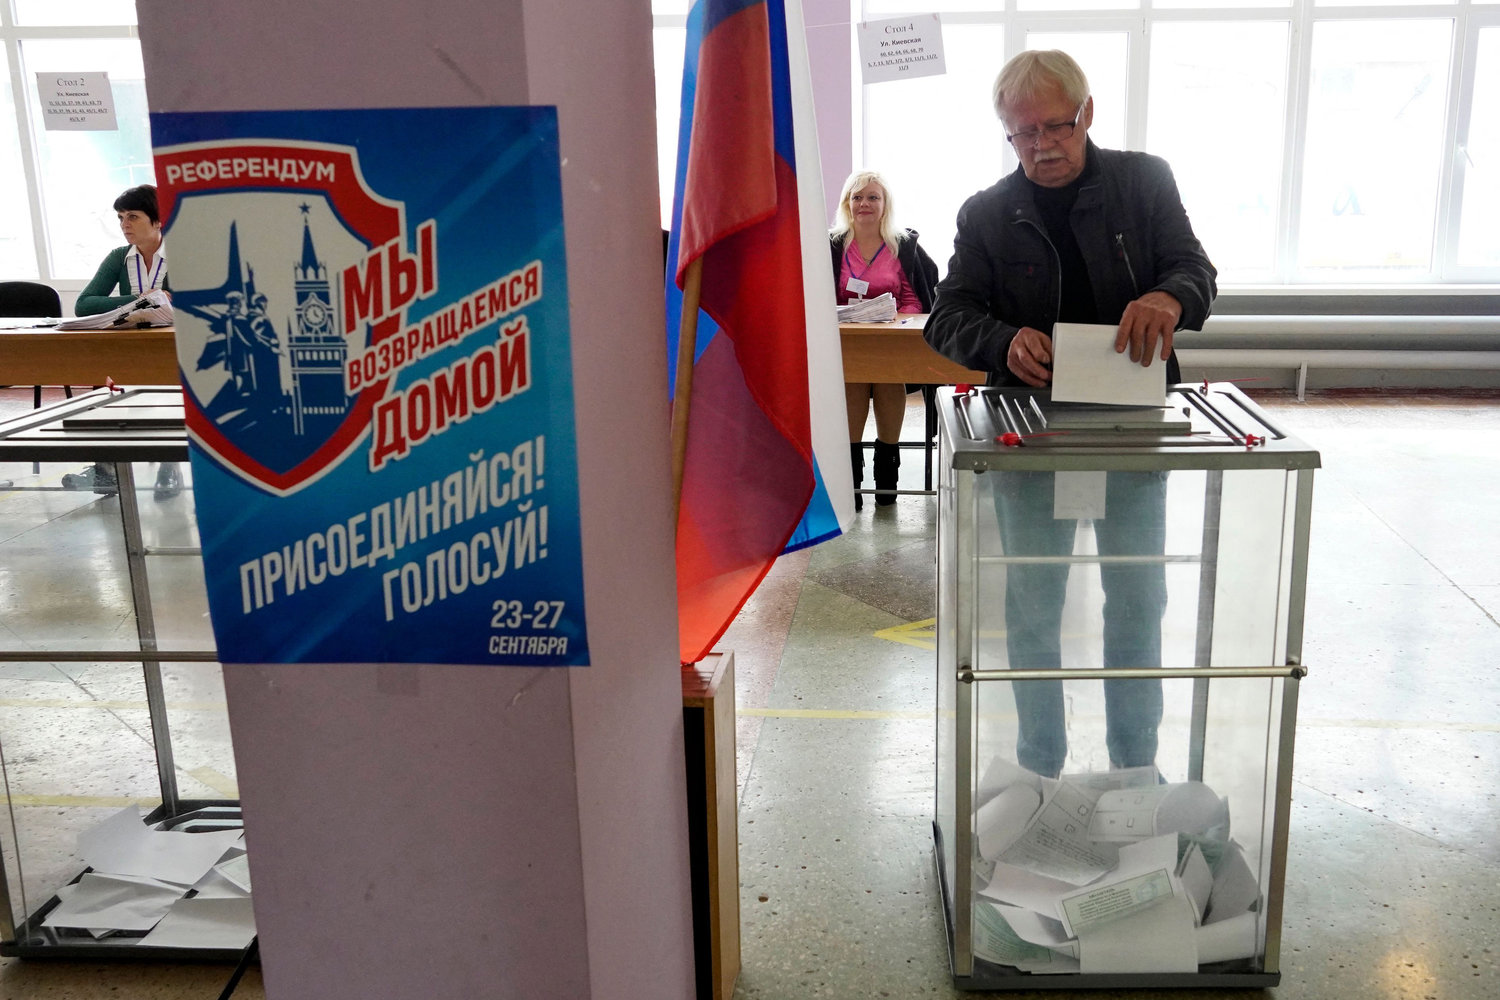 A man casts his ballot for a referendum at a polling station in Mariupol on September 27, 2022. The placard reads "Referendum. We are returning home. Join! Vote!". - Western nations dismissed the referendums in Kremlin-controlled regions of eastern and southern Ukraine as the voting on whether Russia should annex four regions of Ukraine started on September 23, 2022. (STRINGER/AFP via Getty Images/TNS)